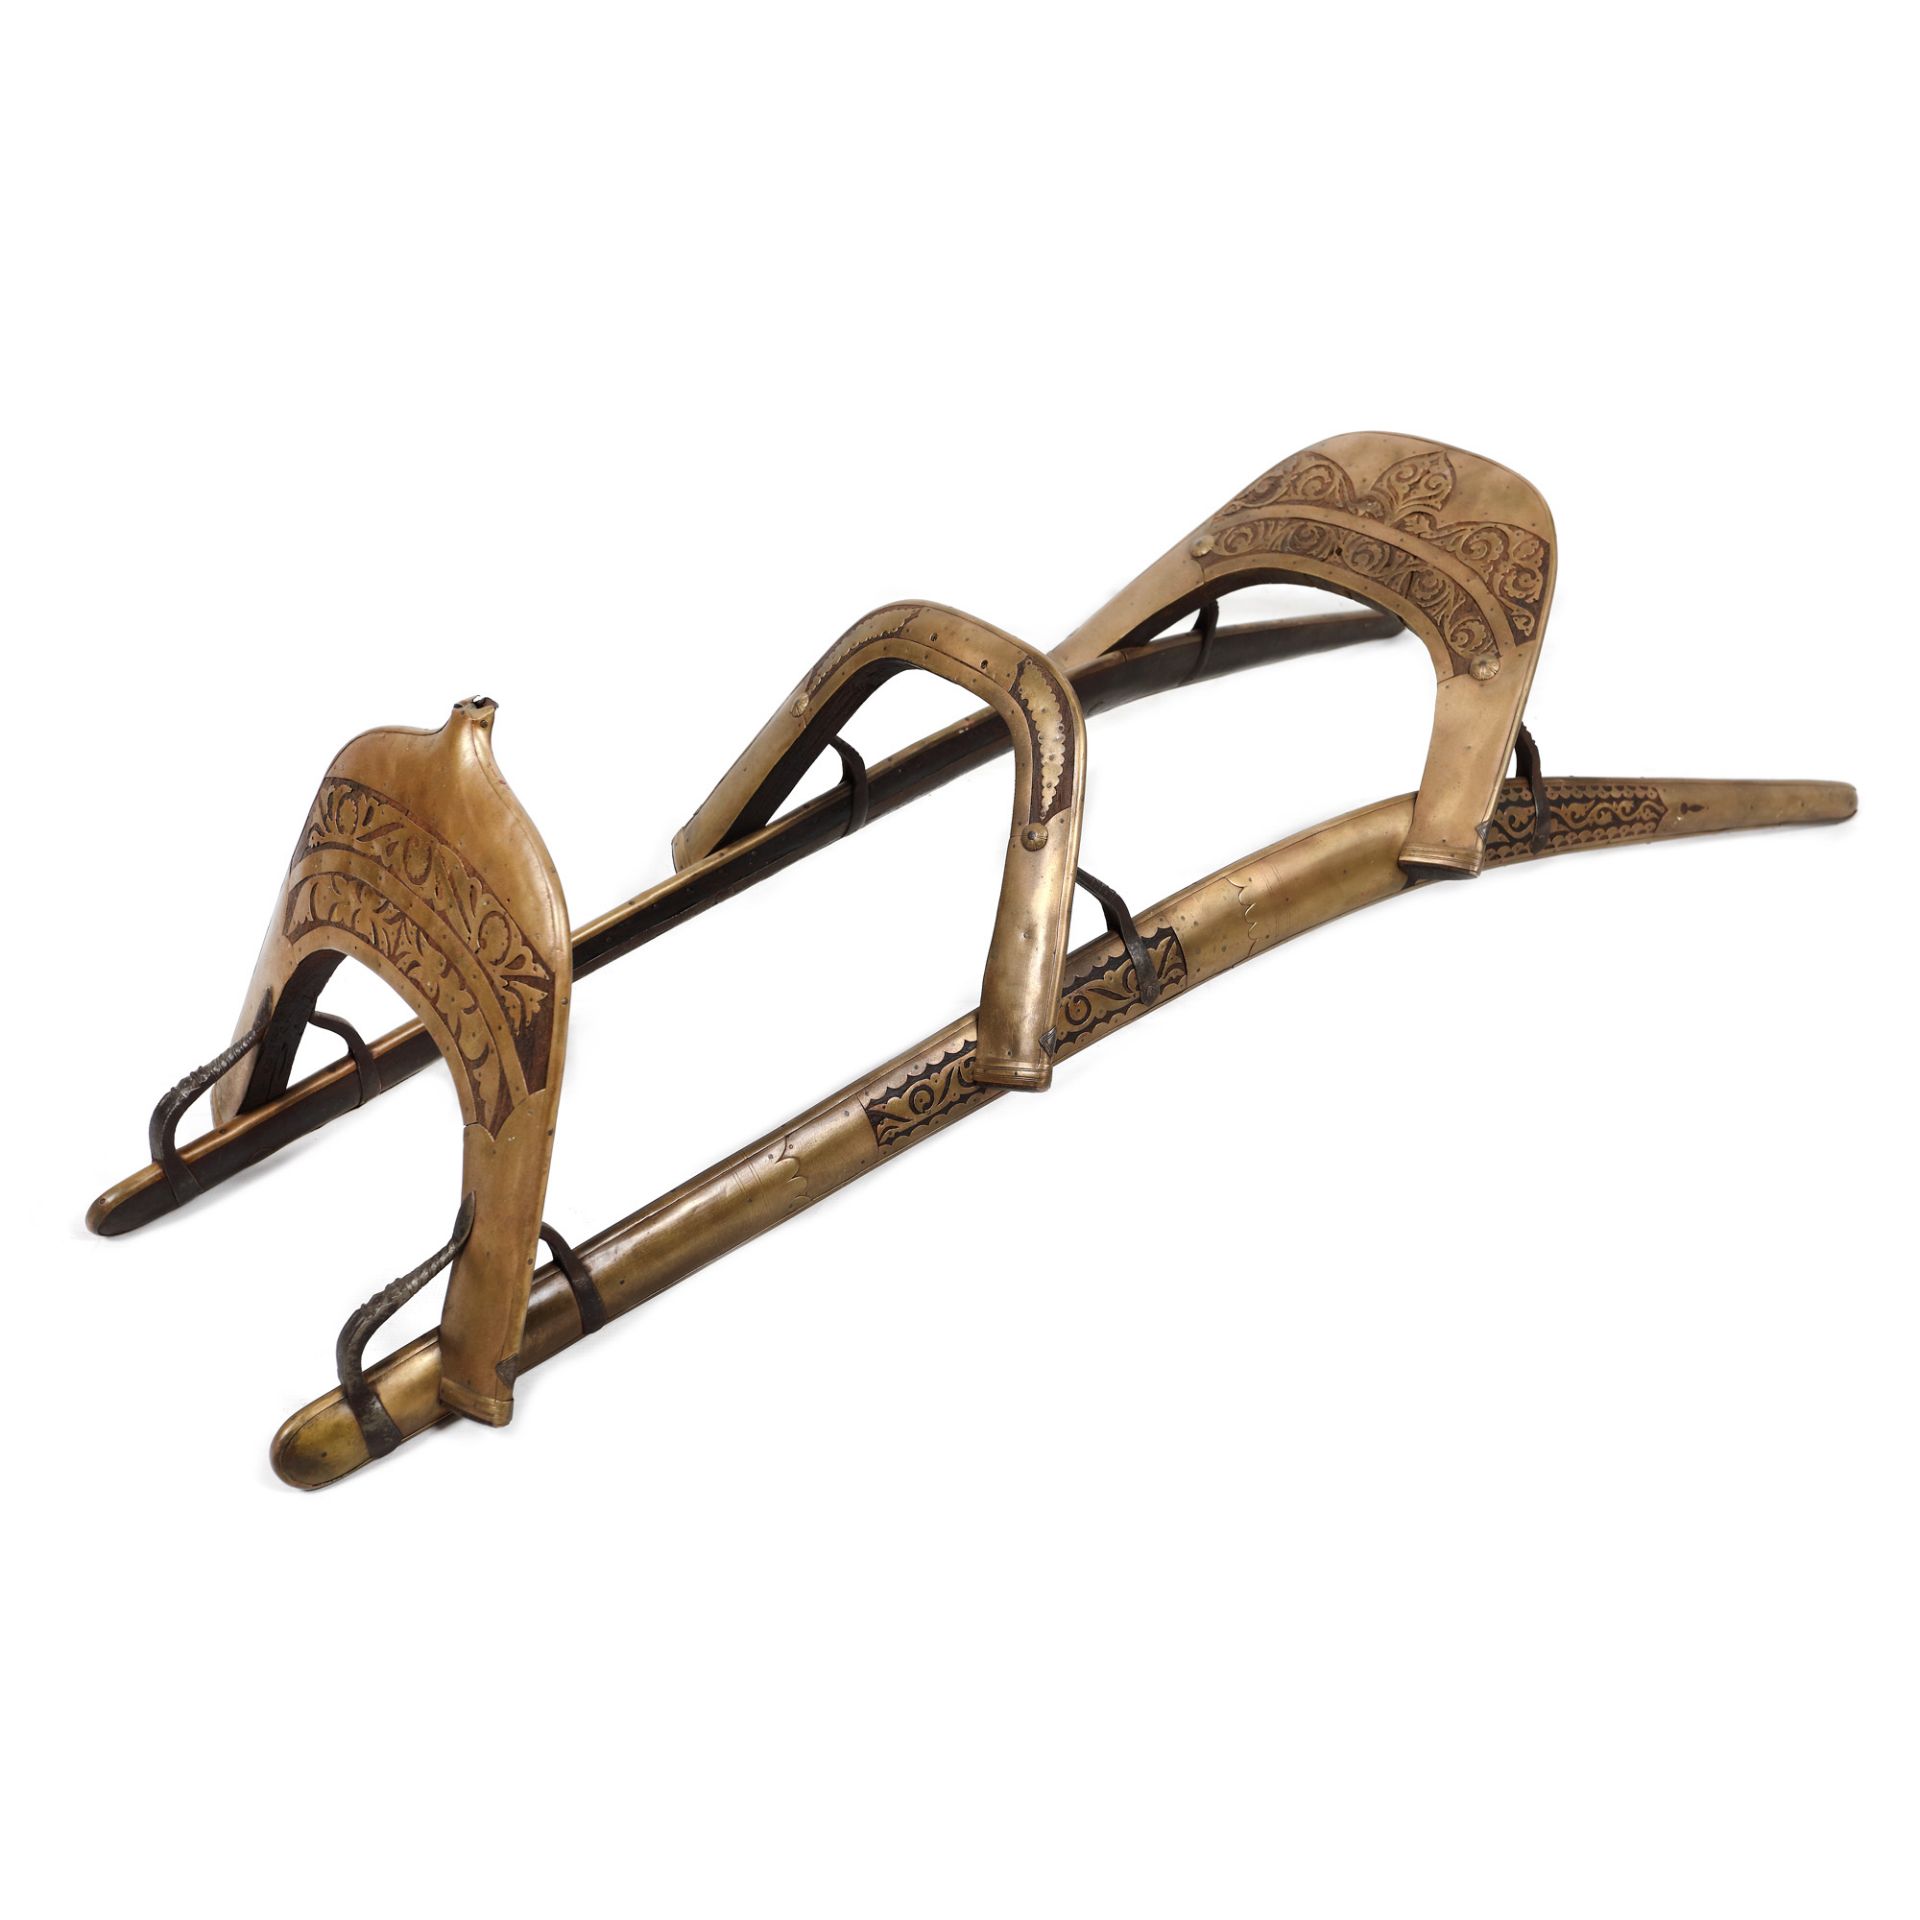 Camel saddle, specific to the Dromedary Regiment, from the Napoleonic campaign in Egypt, early 19th